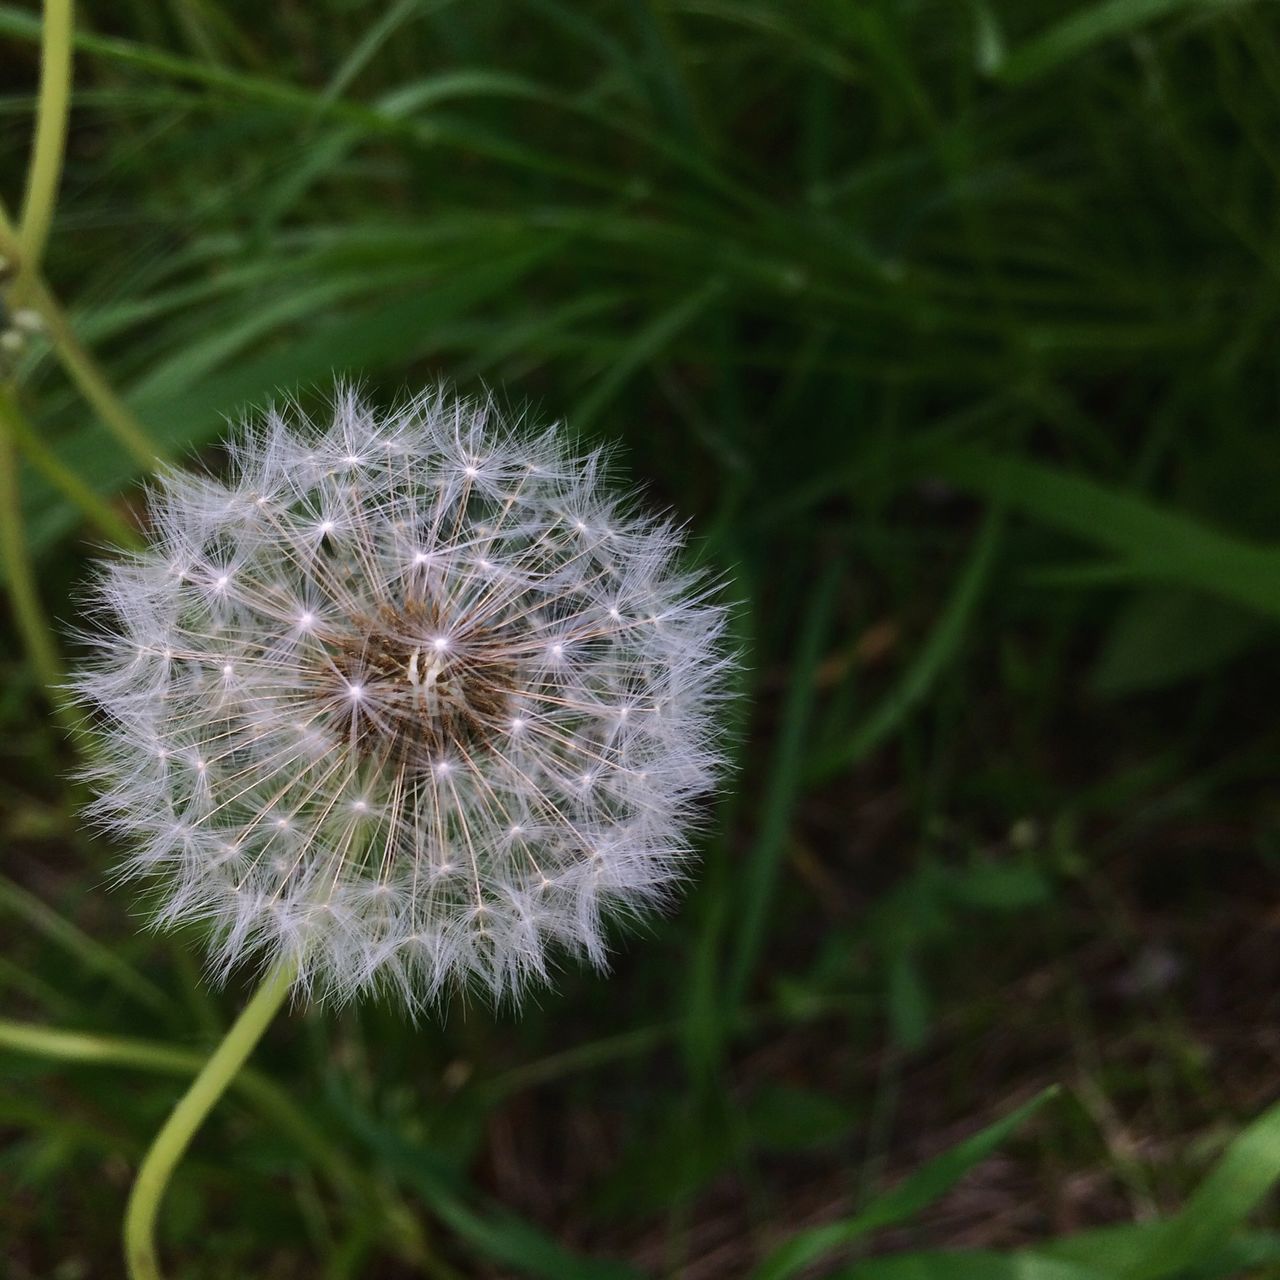 flower, freshness, fragility, dandelion, growth, flower head, close-up, beauty in nature, nature, focus on foreground, single flower, white color, softness, plant, stem, uncultivated, in bloom, wildflower, petal, blooming